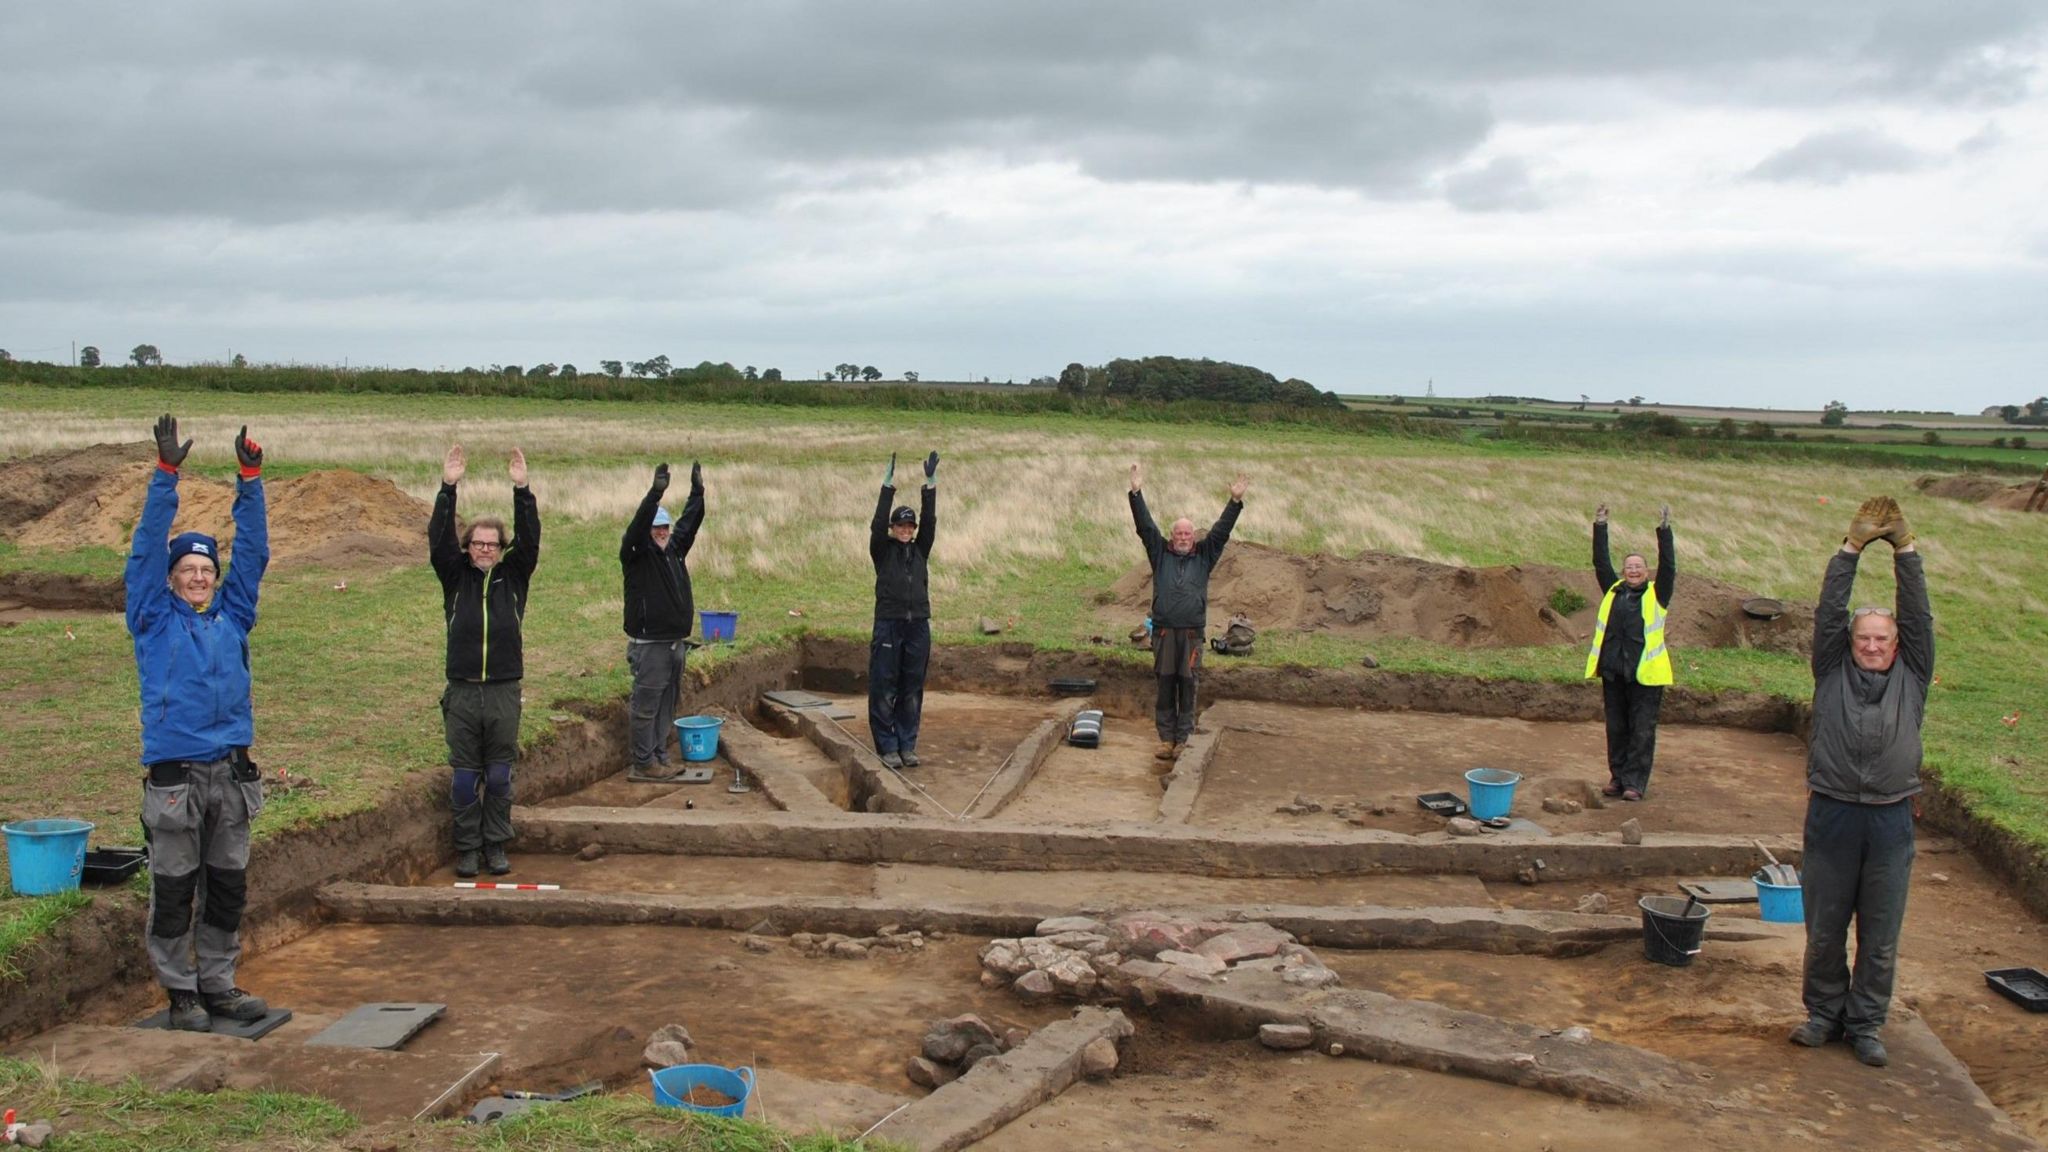 A number of volunteer archaeologists standing in the site of a building holding their arms in the air